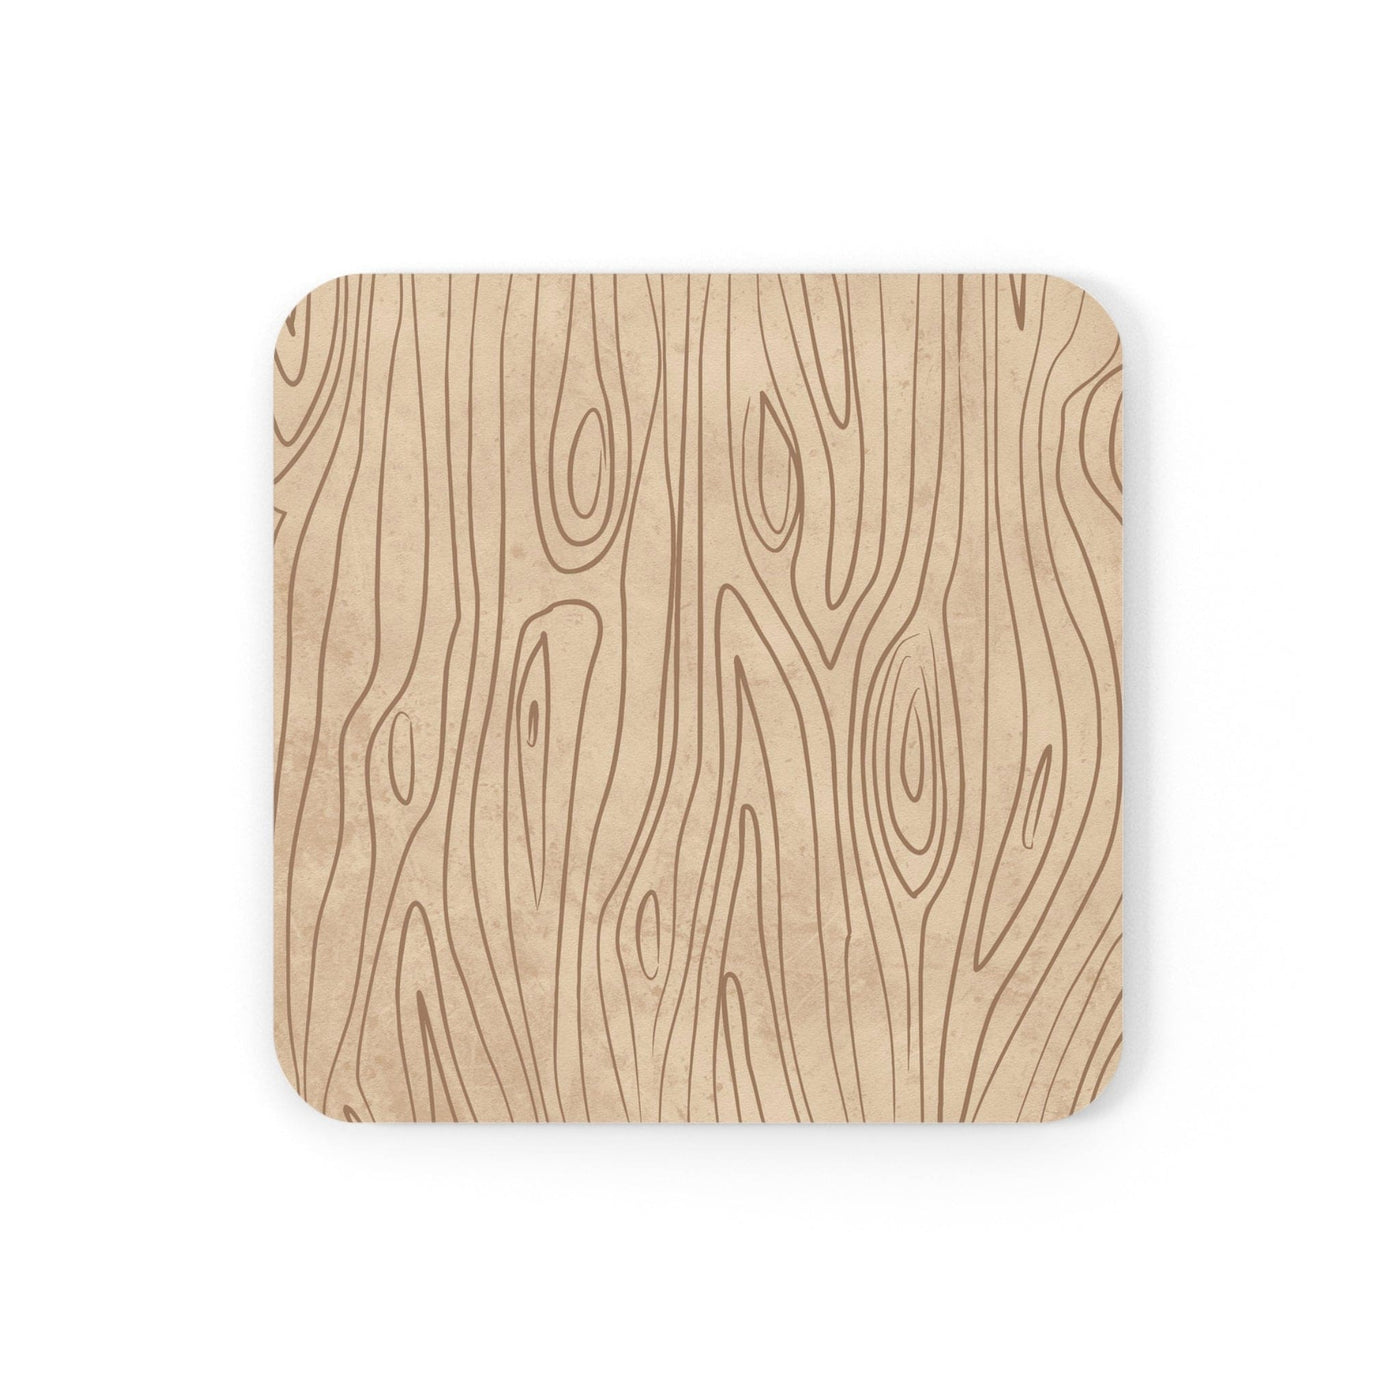 Coaster Set Of 4 For Drinks Beige And Brown Tree Sketch Line Art - Decorative